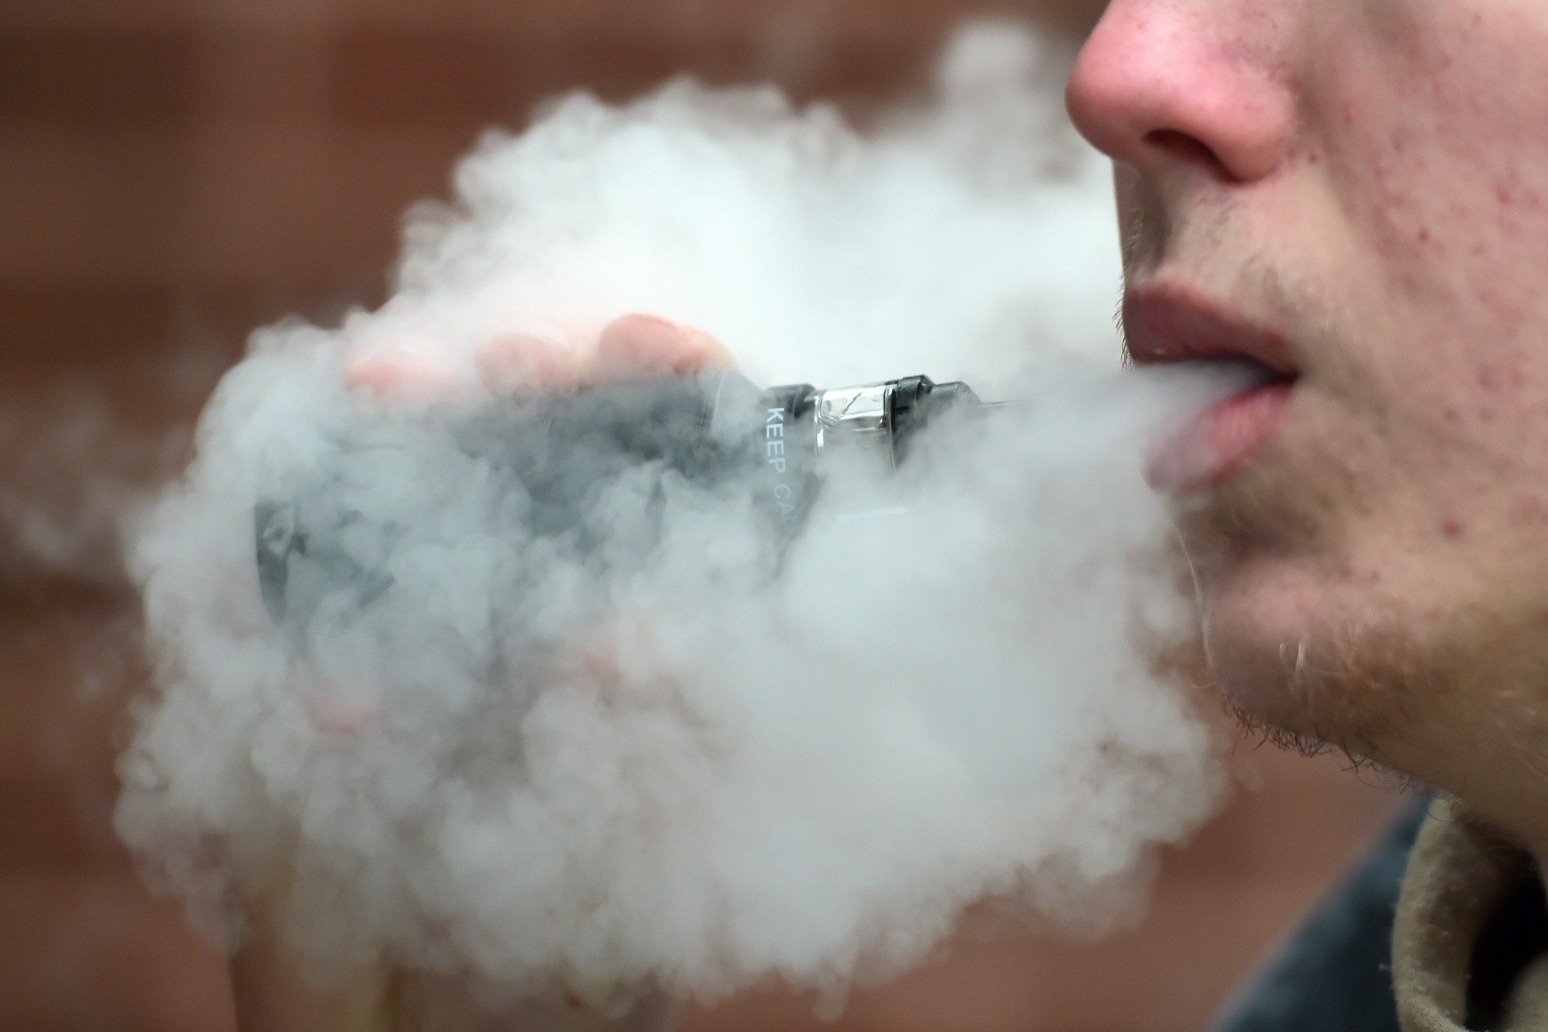 Vaping reaches record levels according to new report 